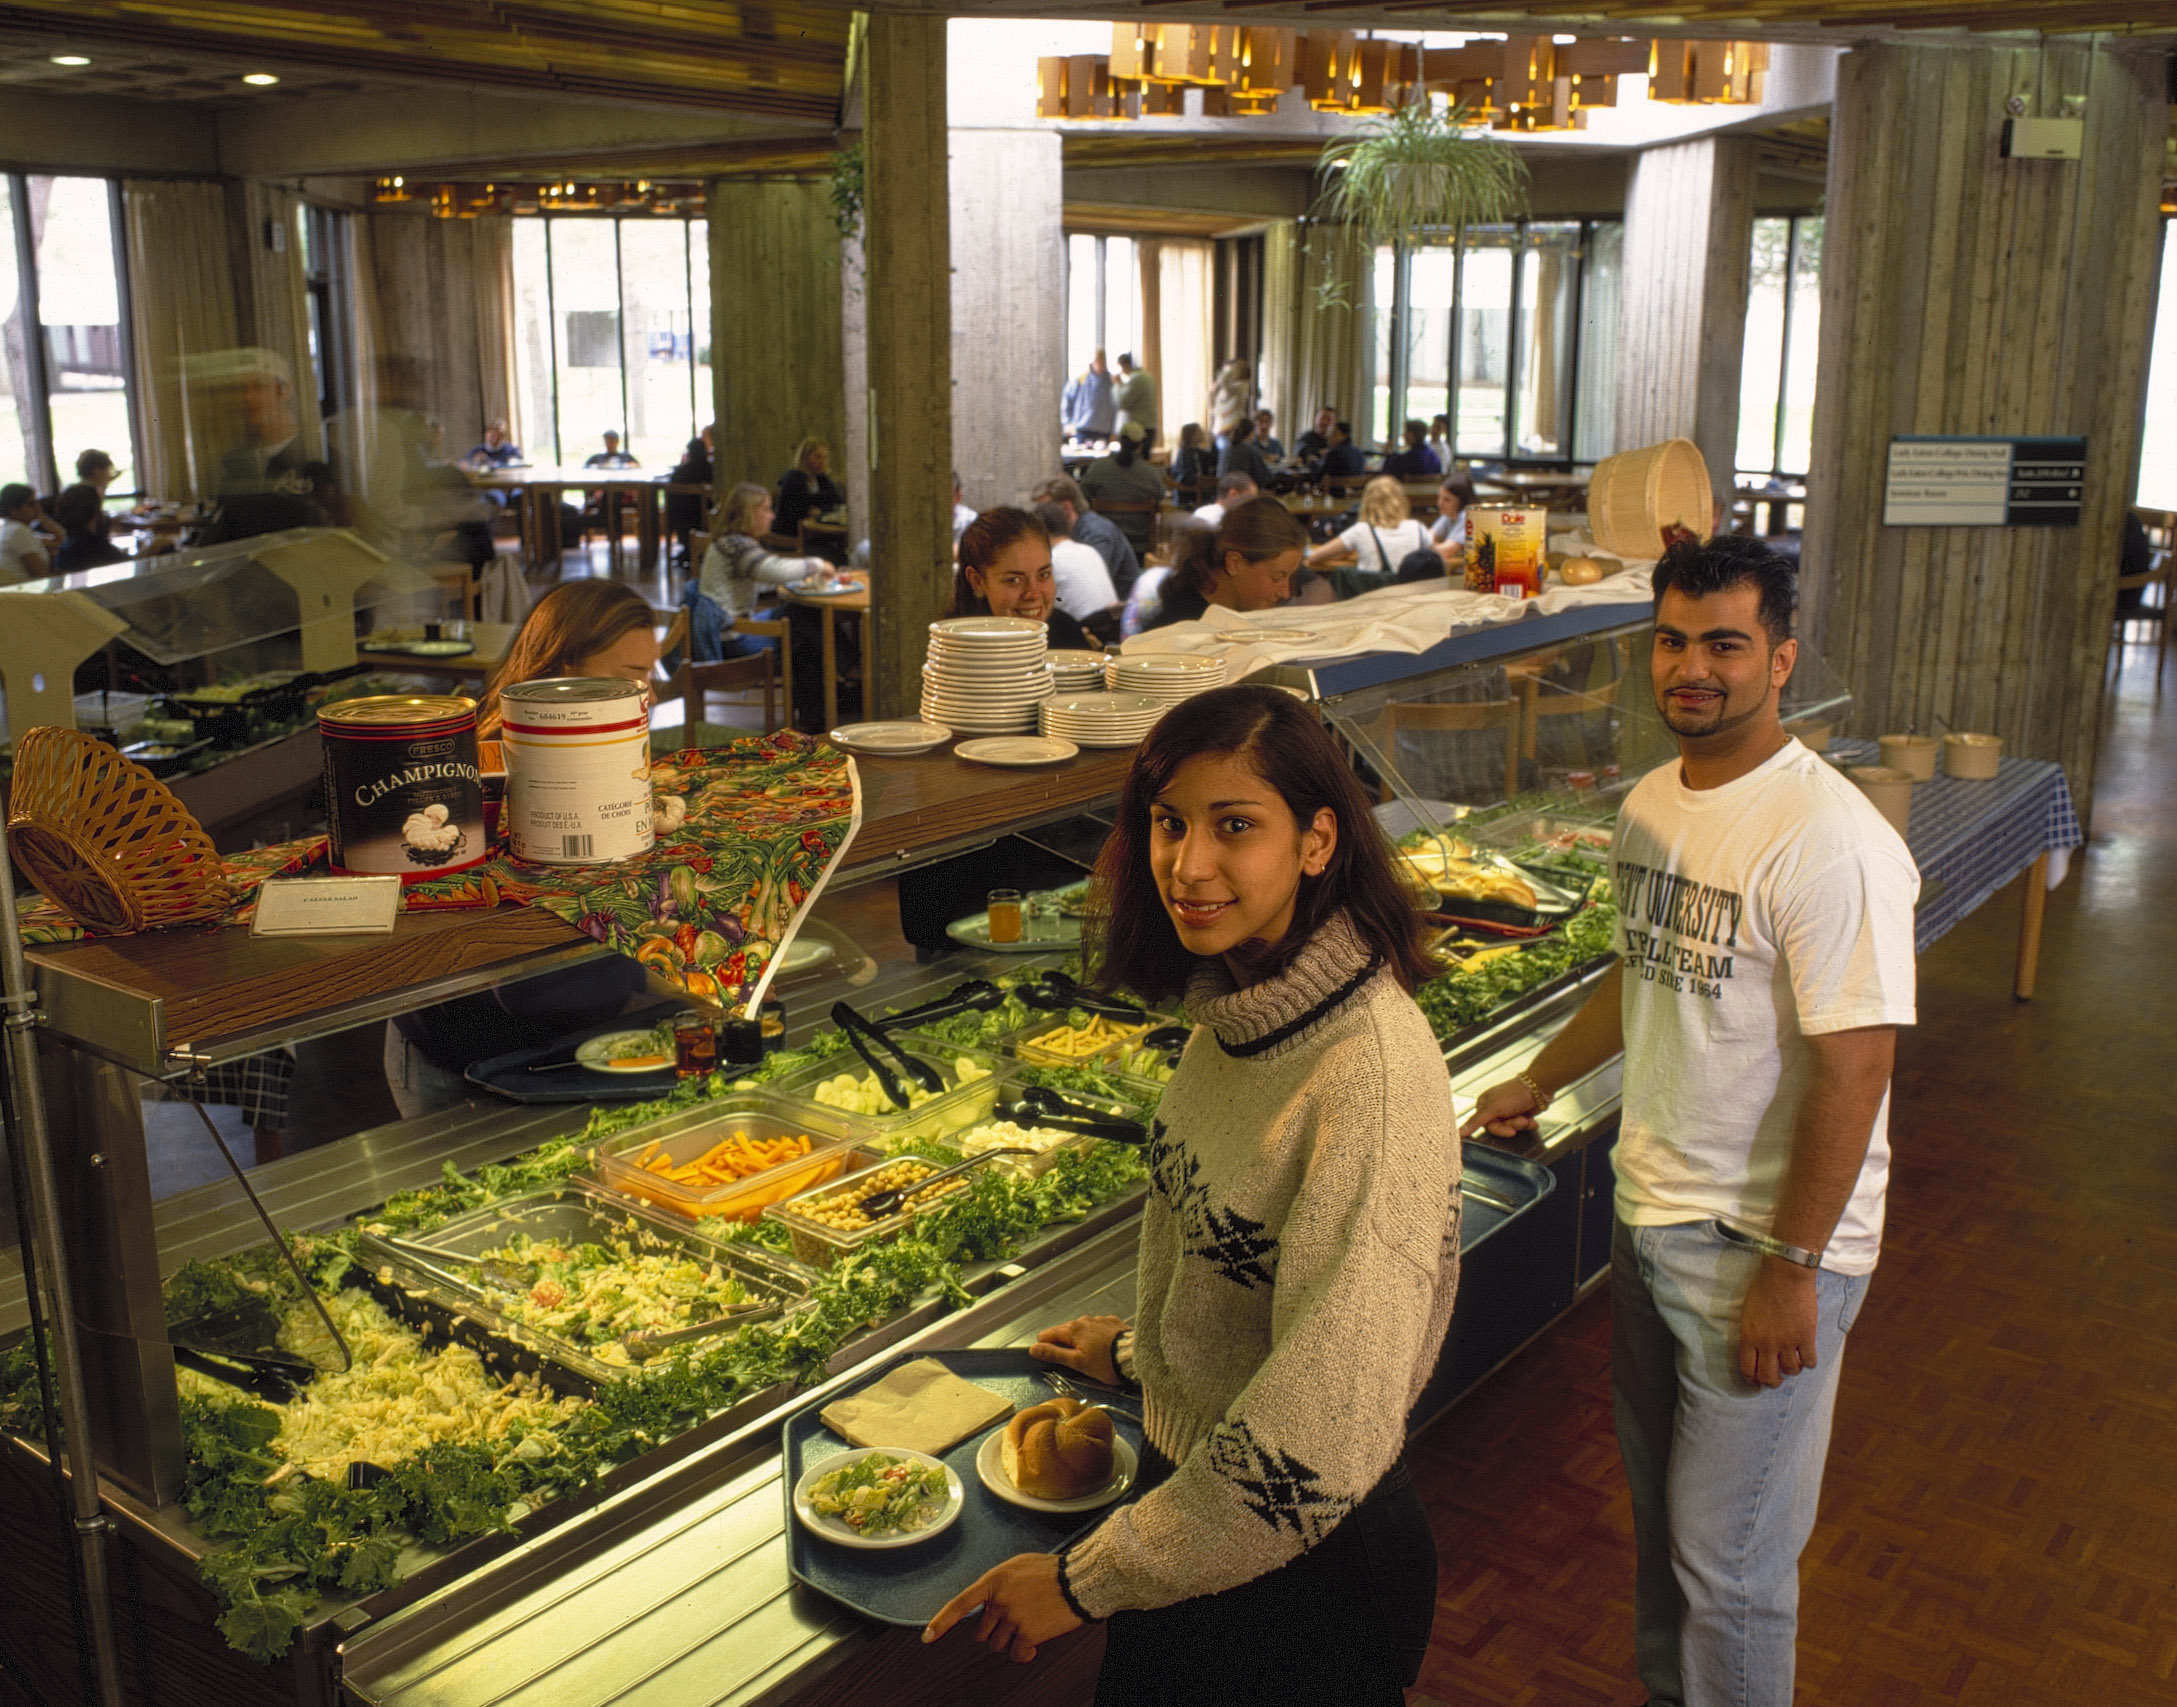 Buffet service at Lady Eaton College Dining Hall